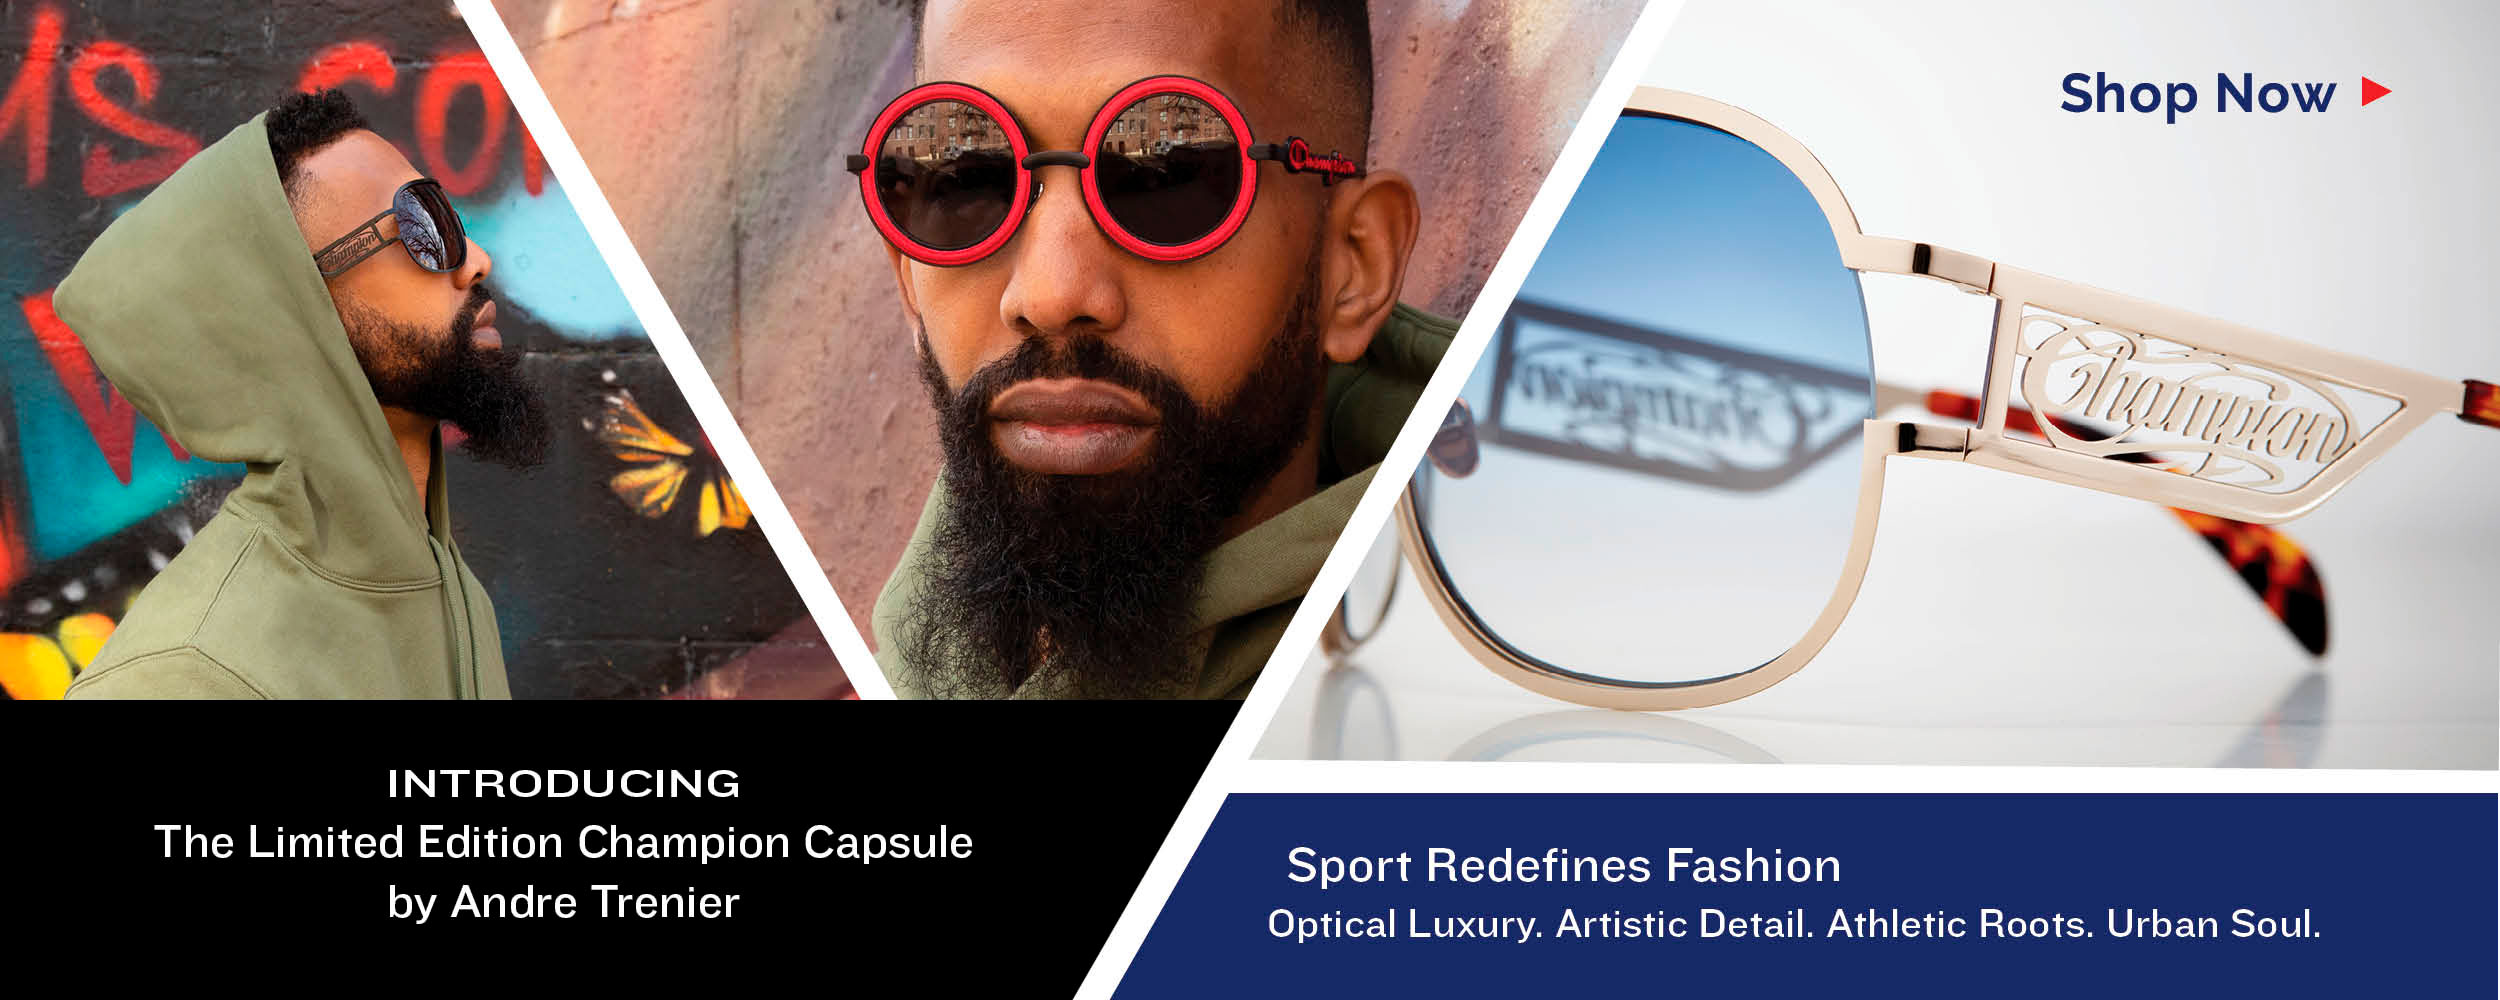 Introducing the Limited Edition Champion Capsule by Andre Trenier. Sport Redefines Fashion. Optical Luxury. Artistic Details. Athletic Roots. Urban Soul. Shop Now.